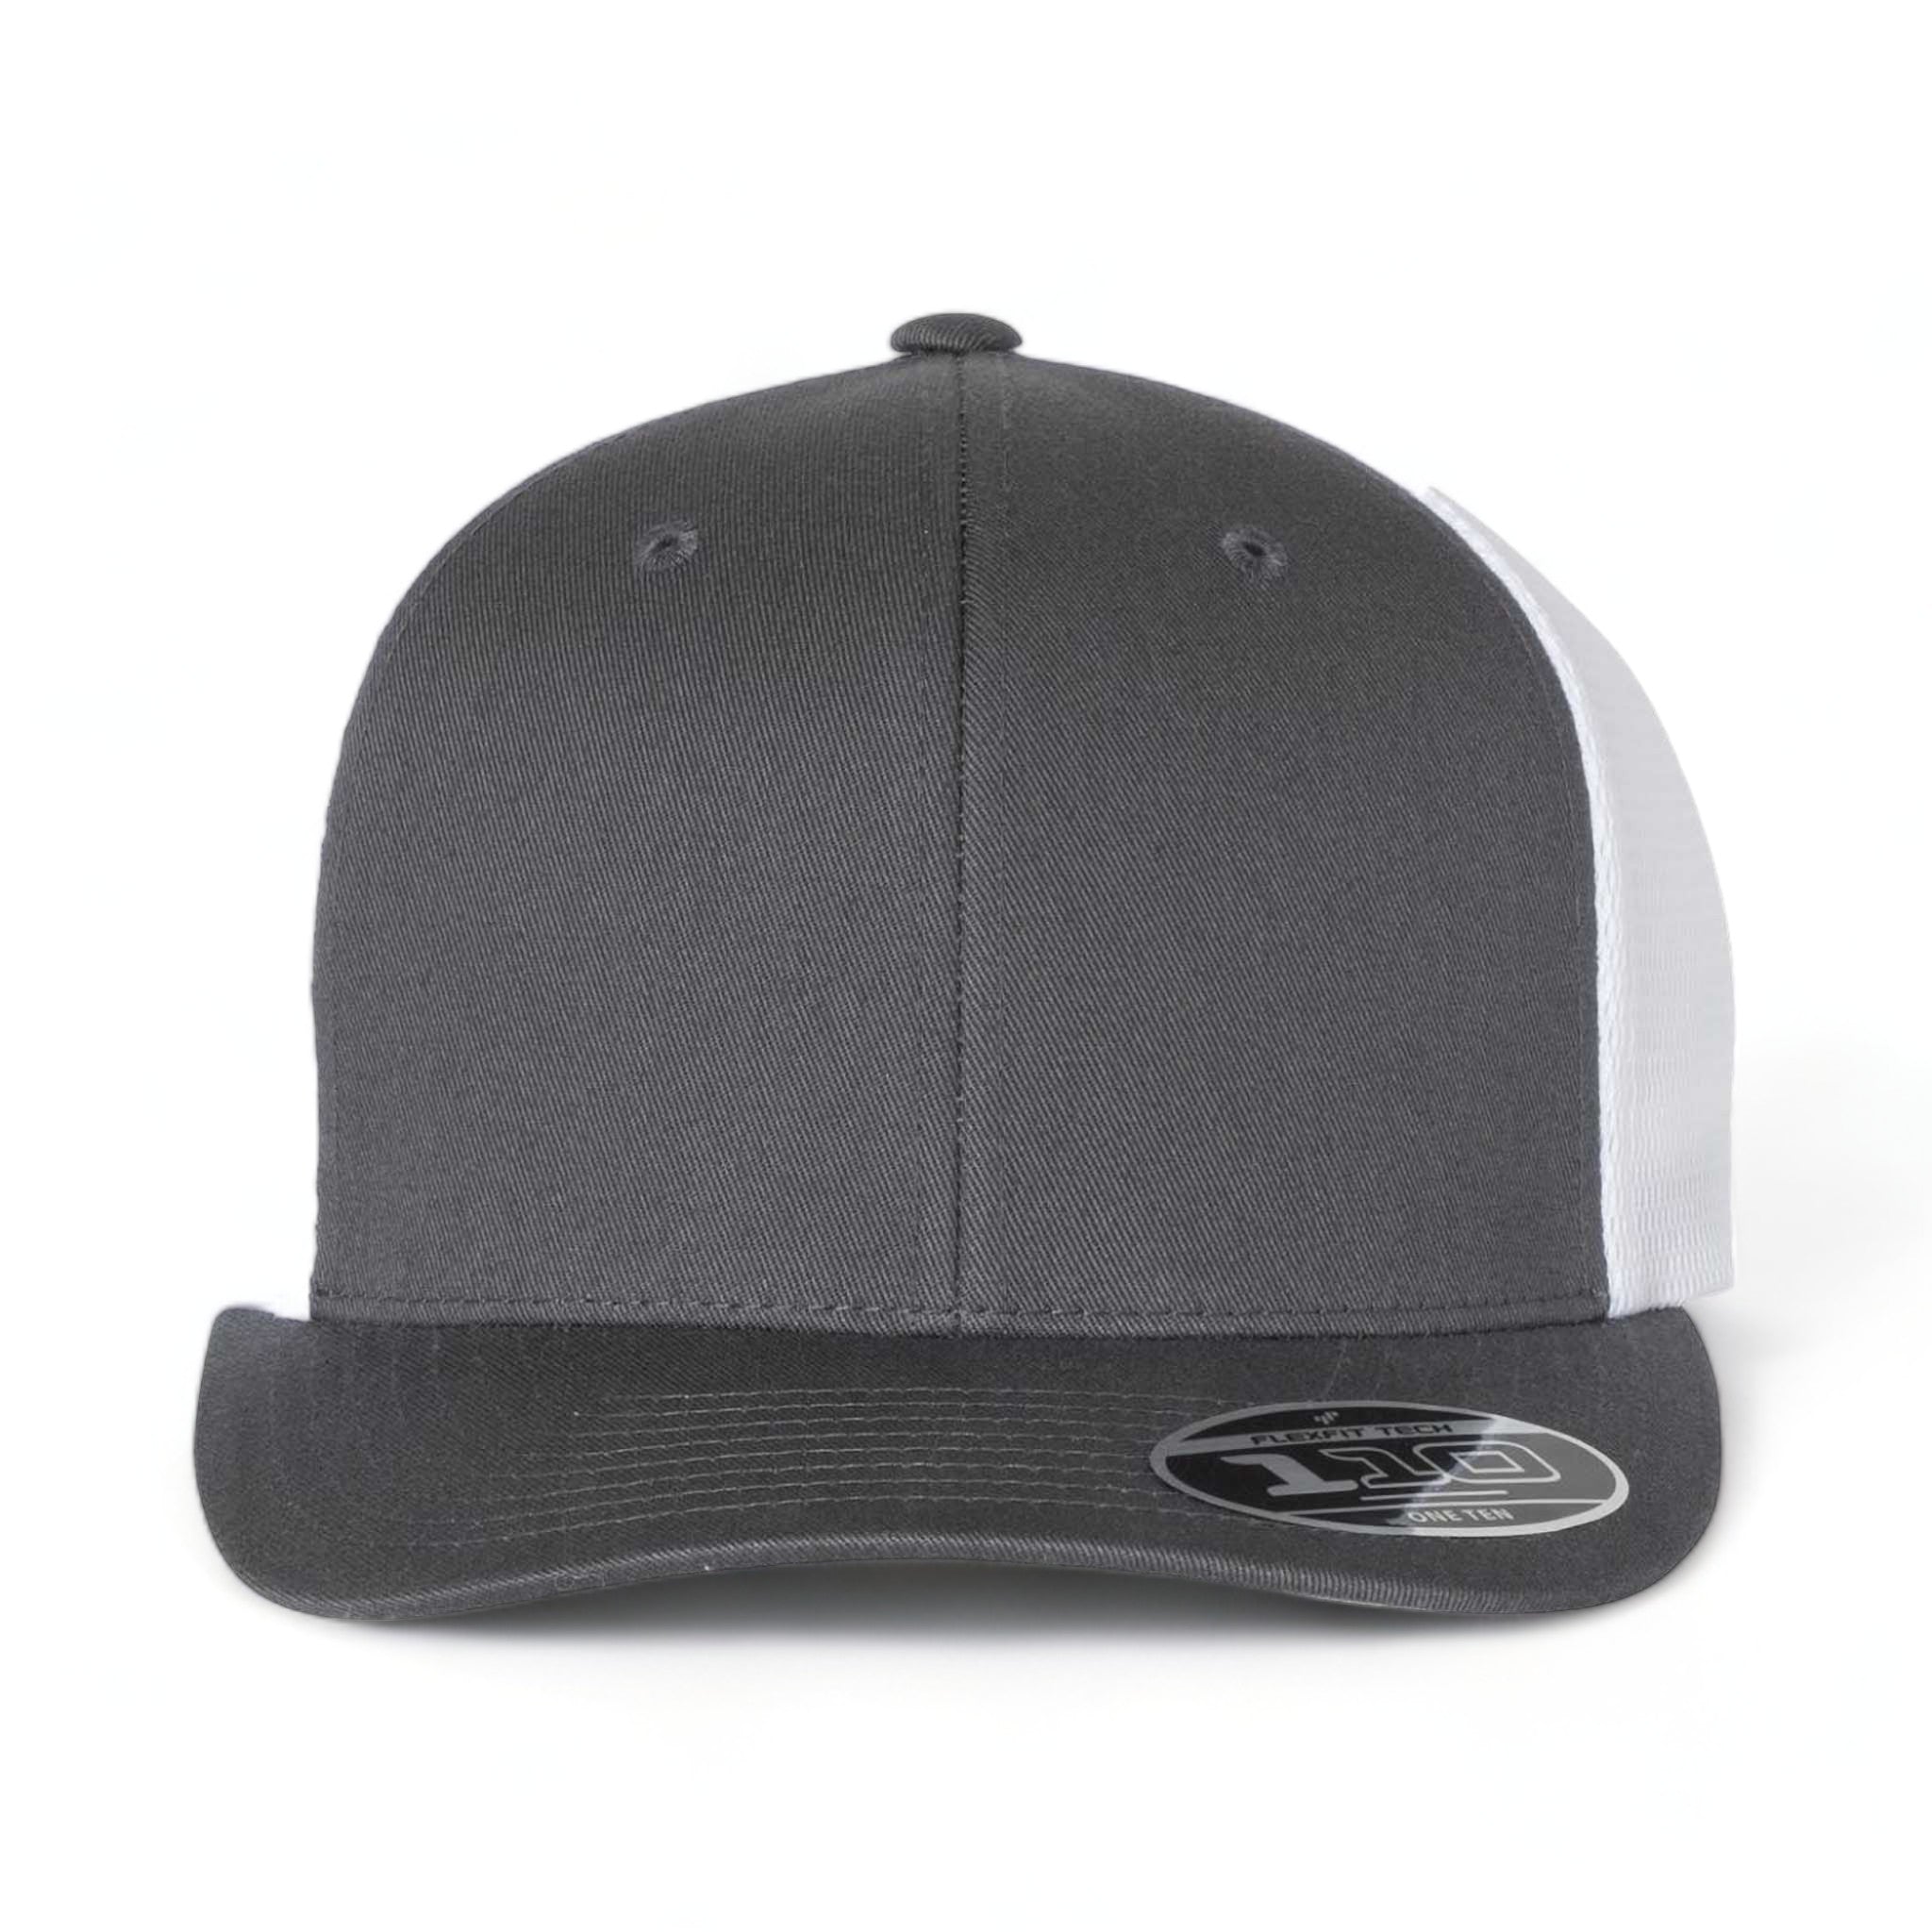 Front view of Flexfit 110M custom hat in charcoal and white